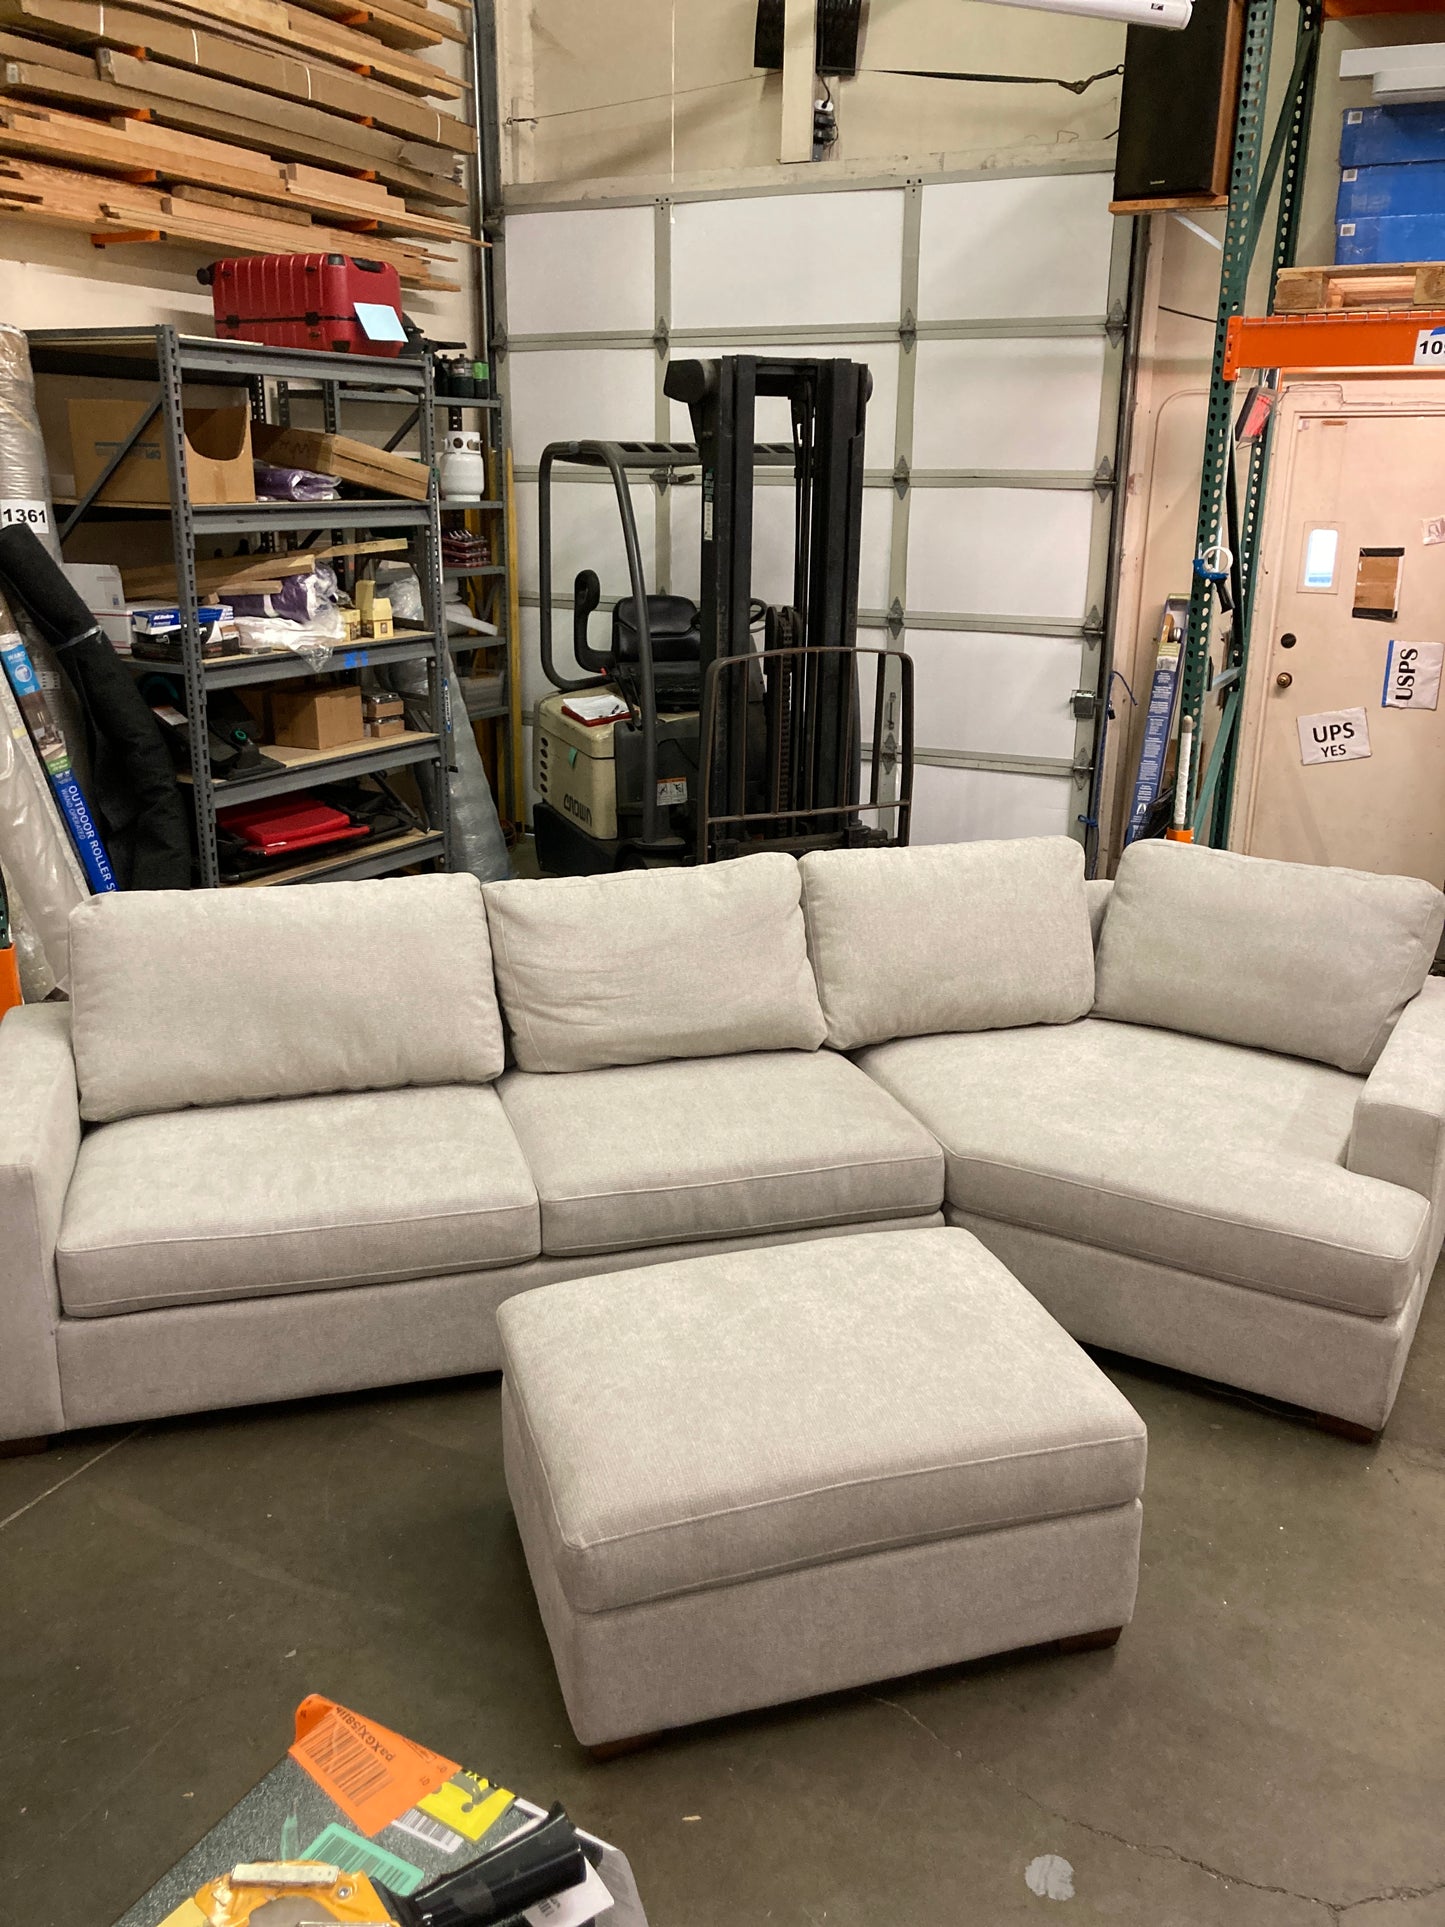 Costco - Thomasville Ezra Fabric Sectional with Ottoman - Retail $1799